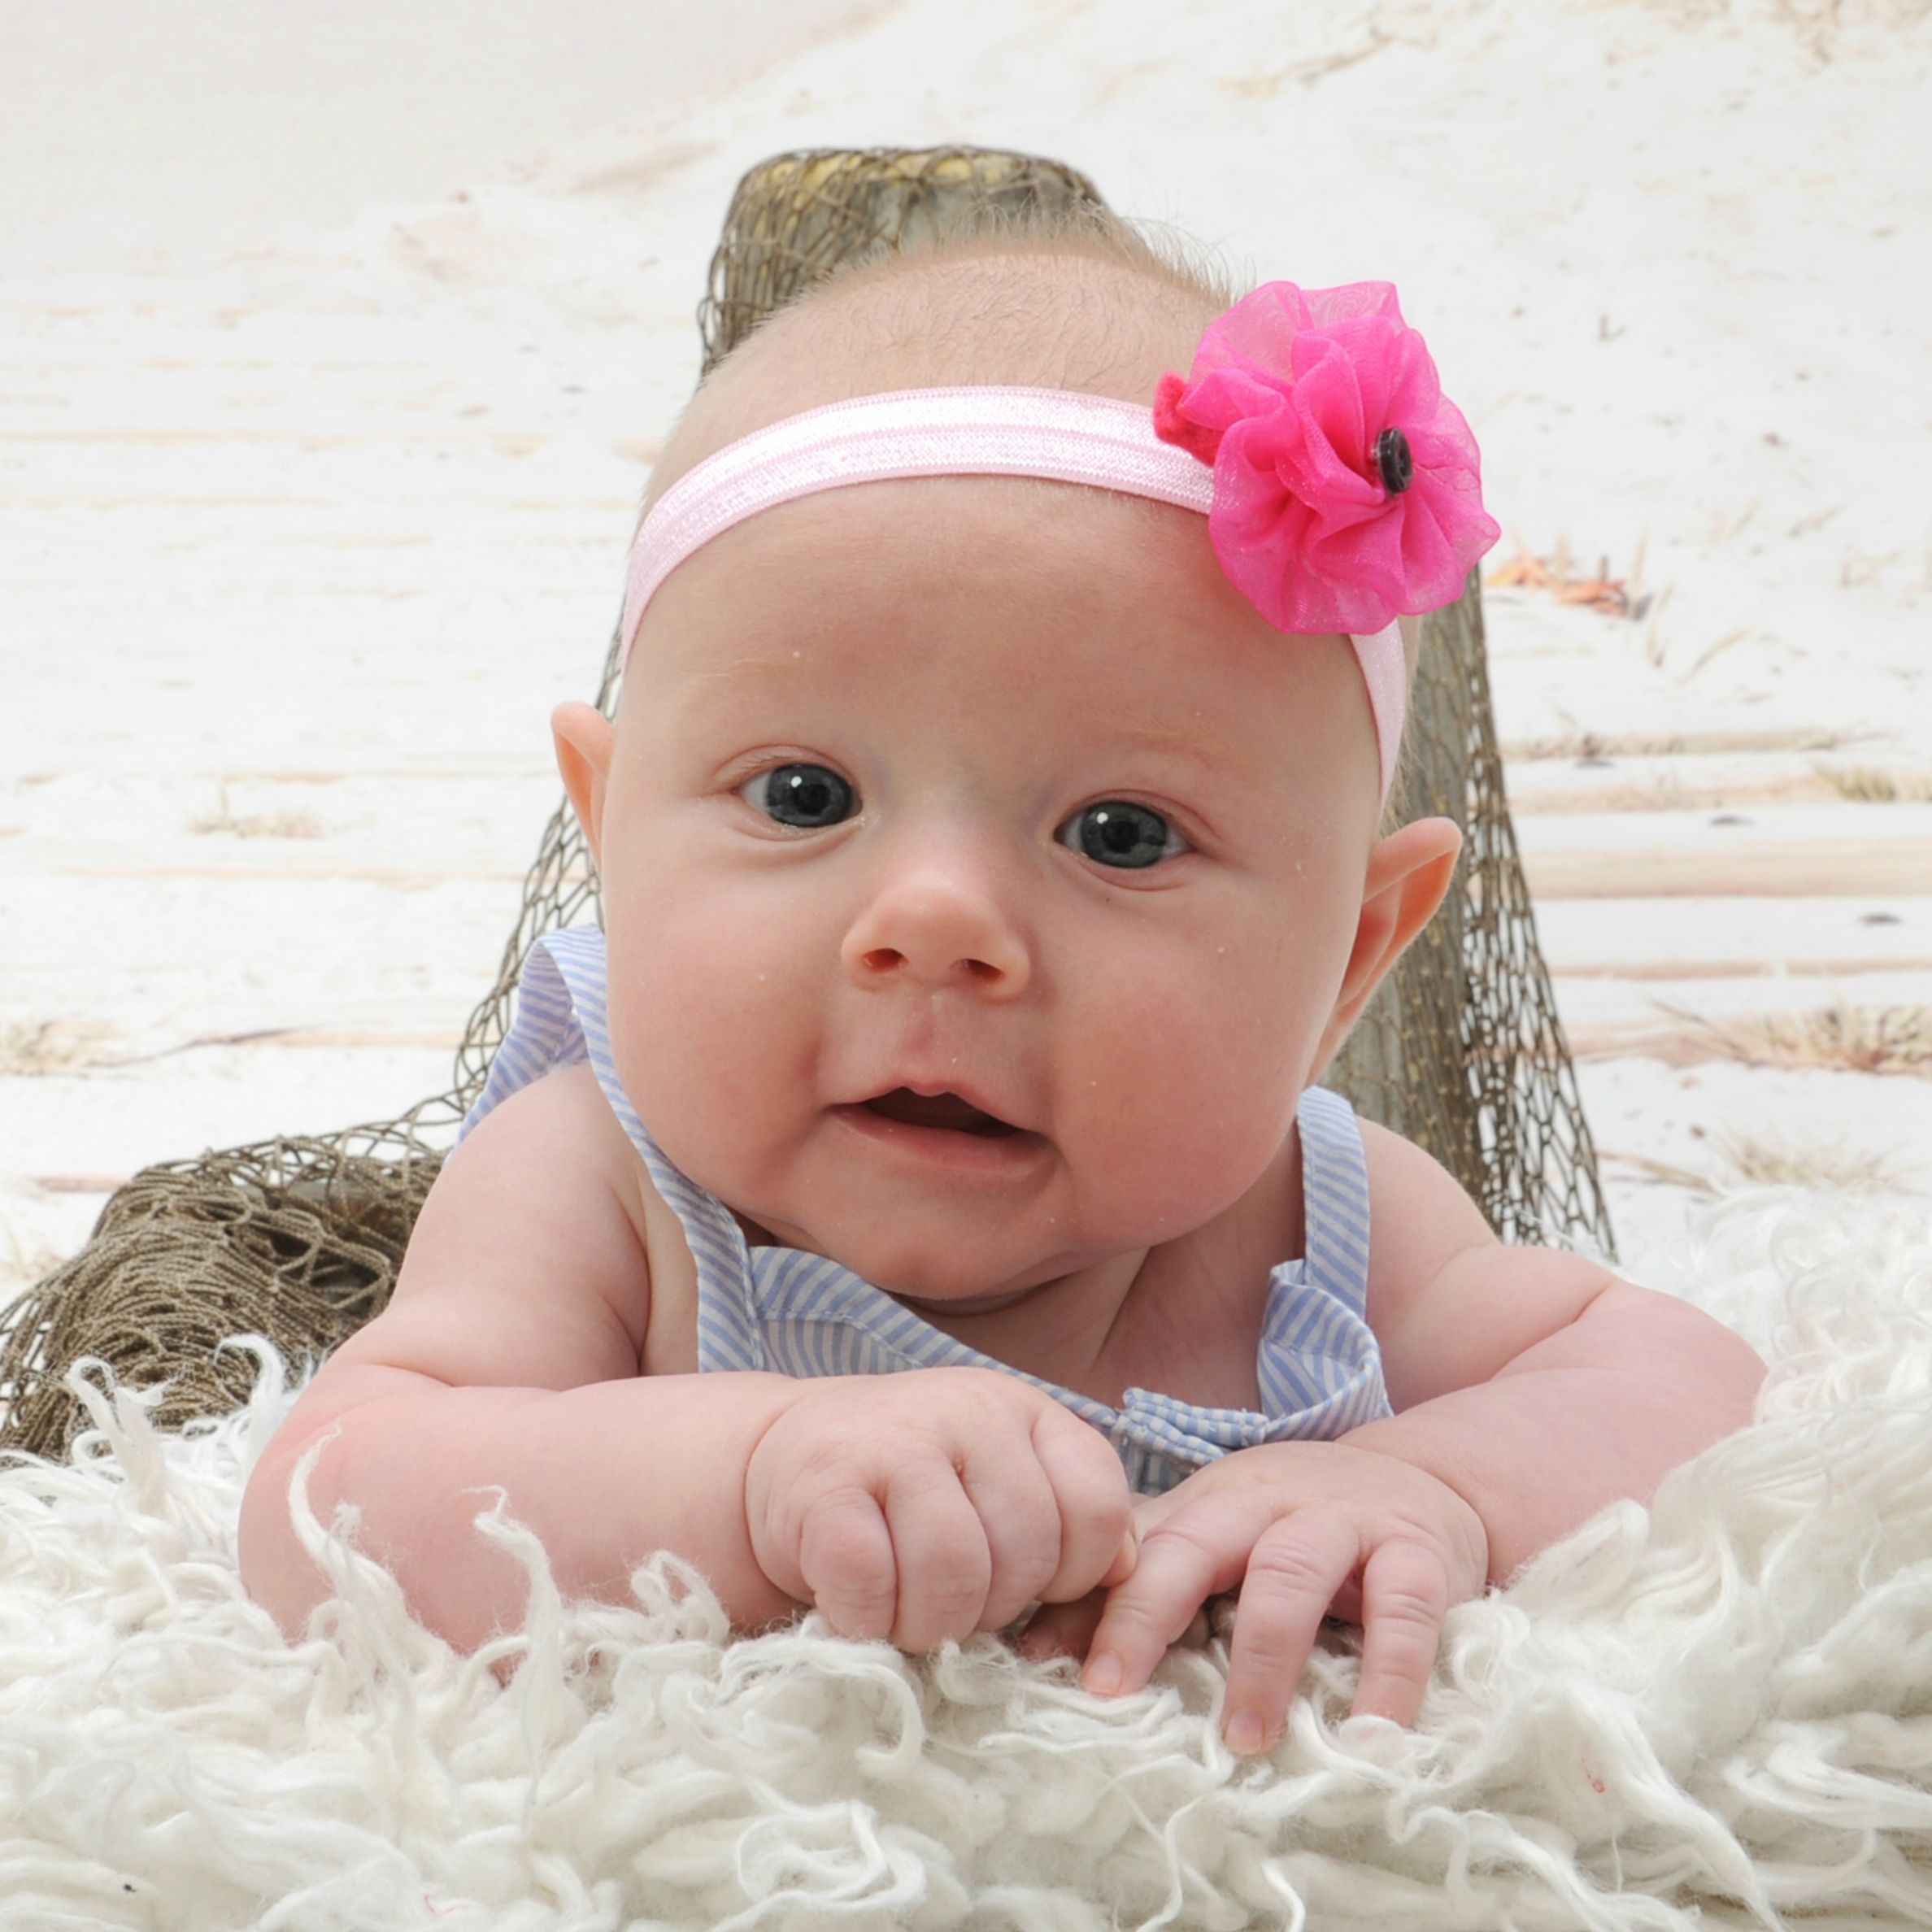 Baby on the Beach: Capturing Summer Memories of Your Infant